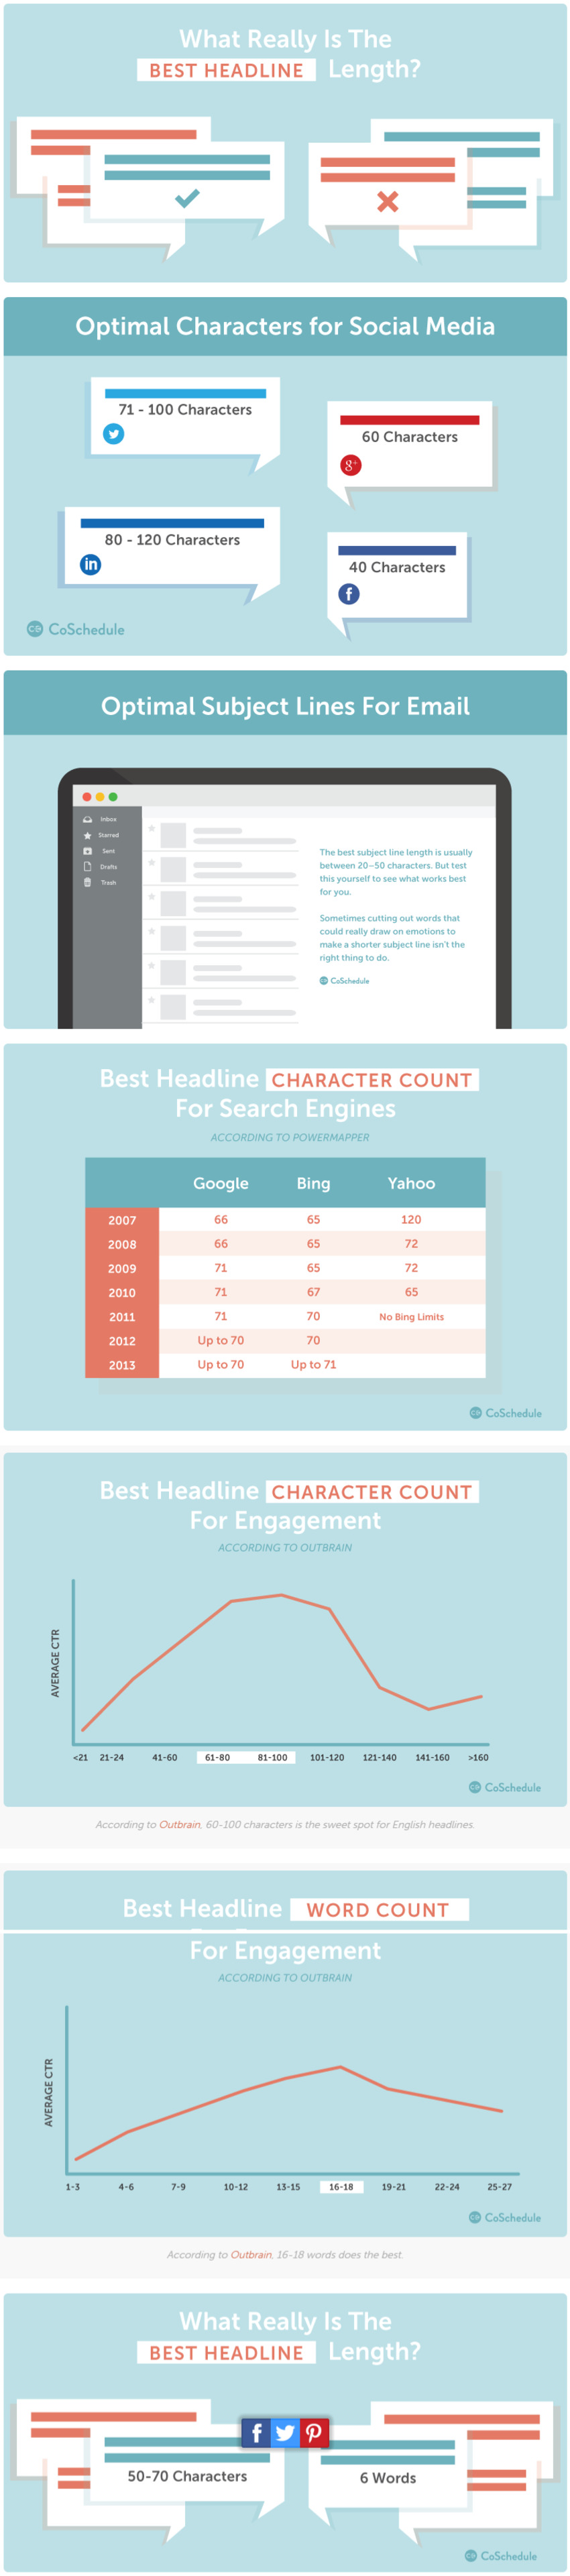 What Really Is The Best Headline Length? - CoSchedule | The MarTech Digest | Scoop.it